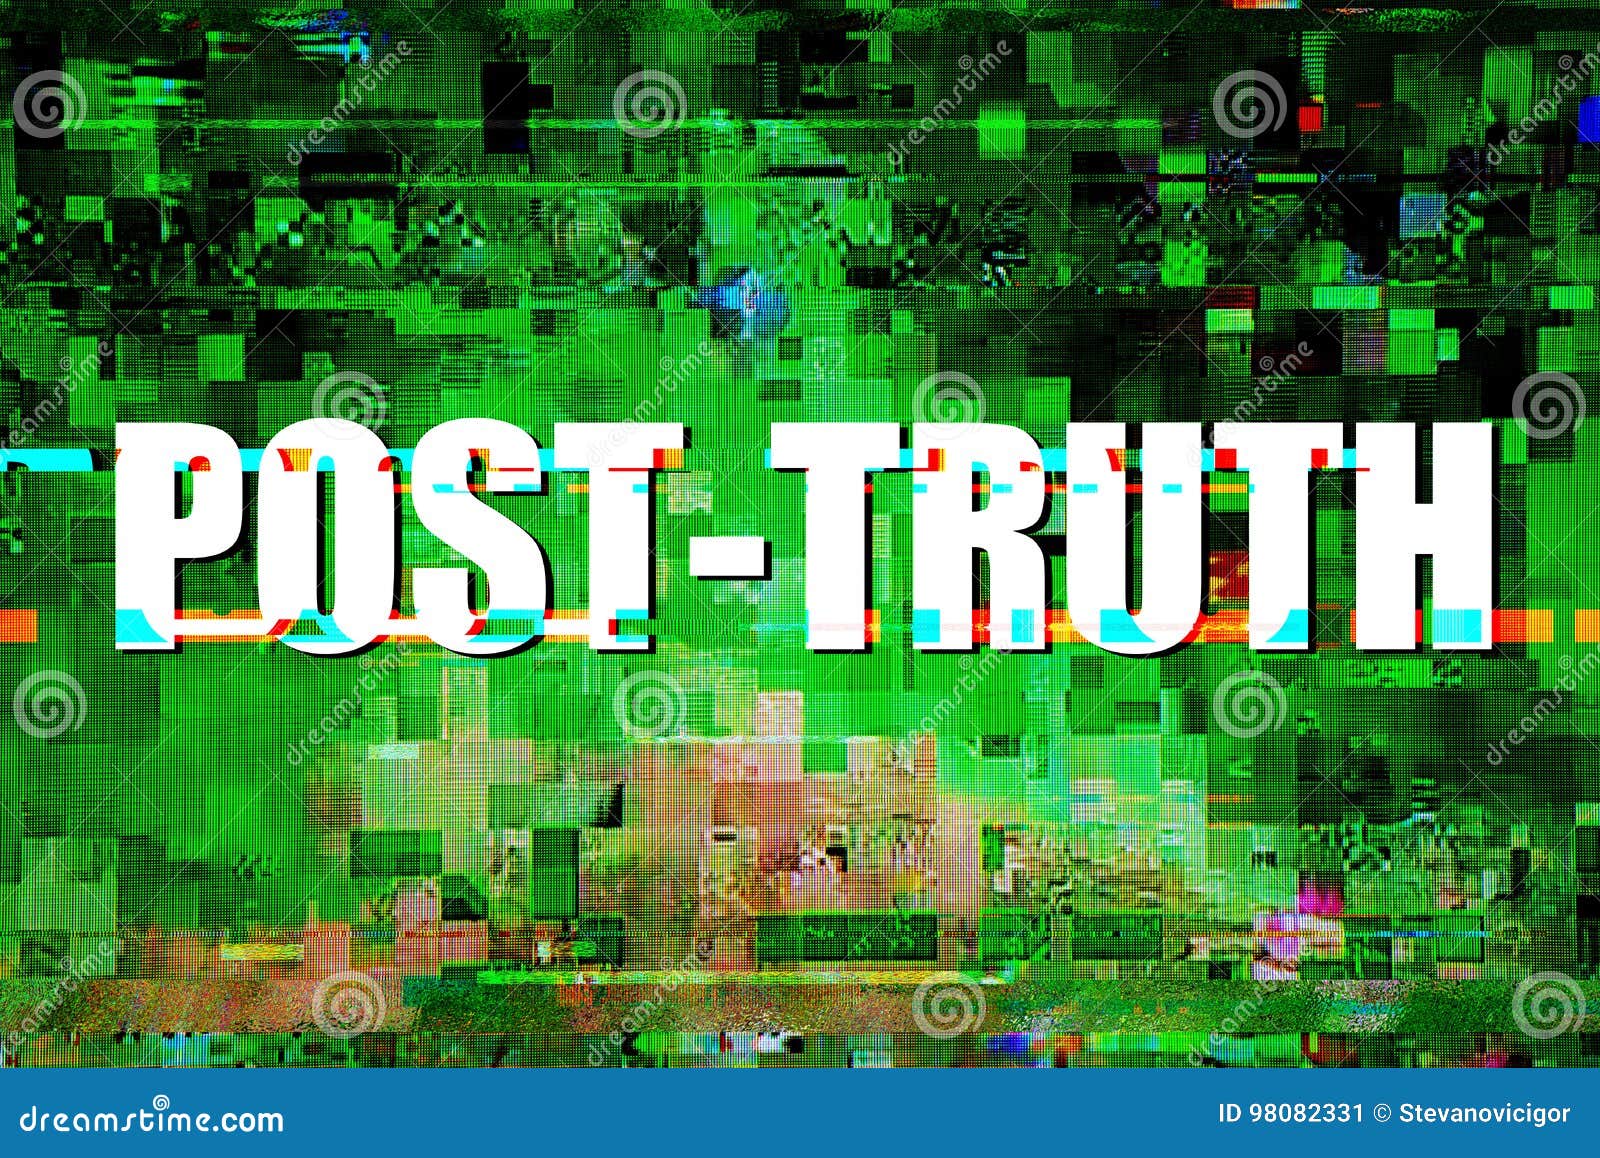 post-truth or post-factual concept